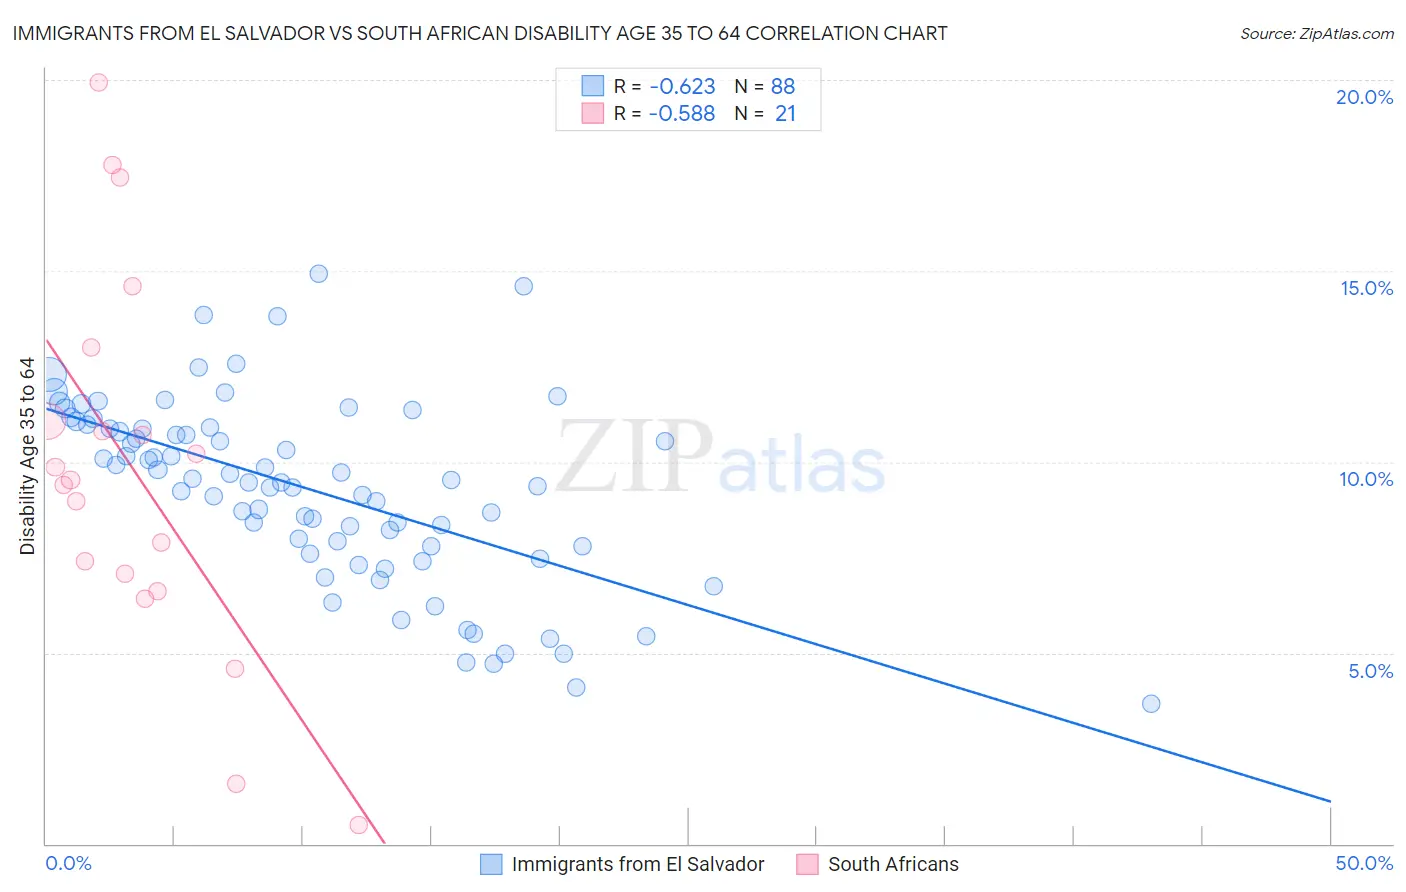 Immigrants from El Salvador vs South African Disability Age 35 to 64